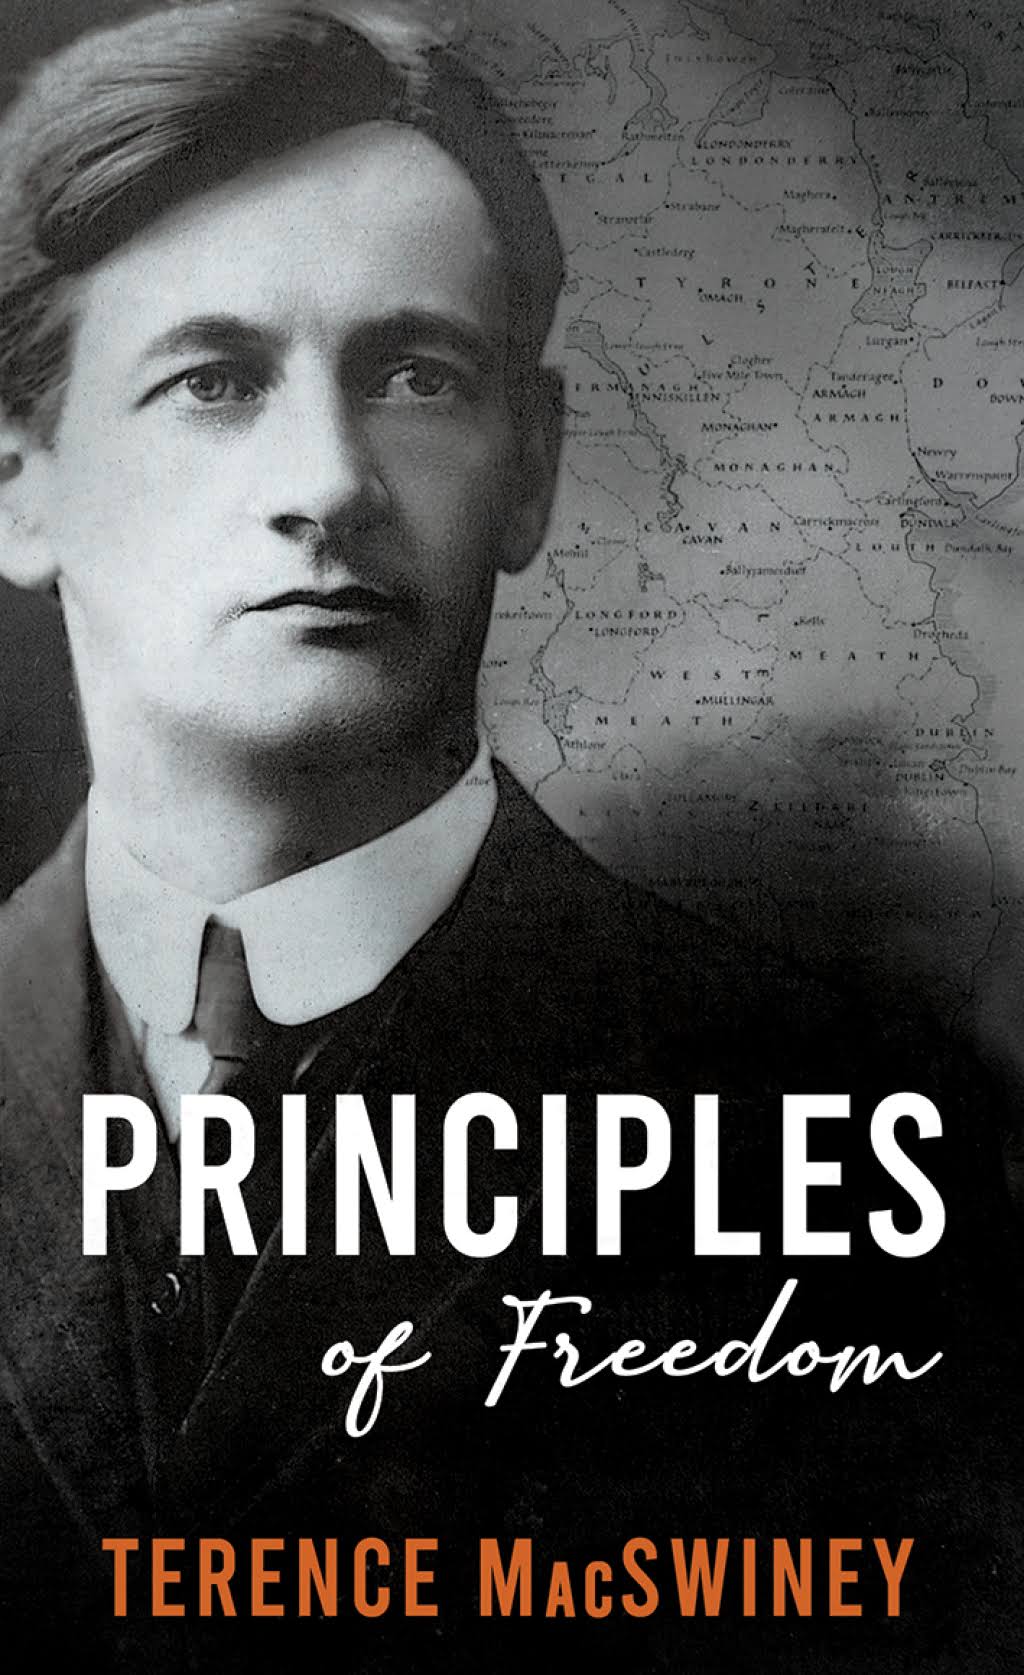 Principles of Freedom by Terence MacSwiney